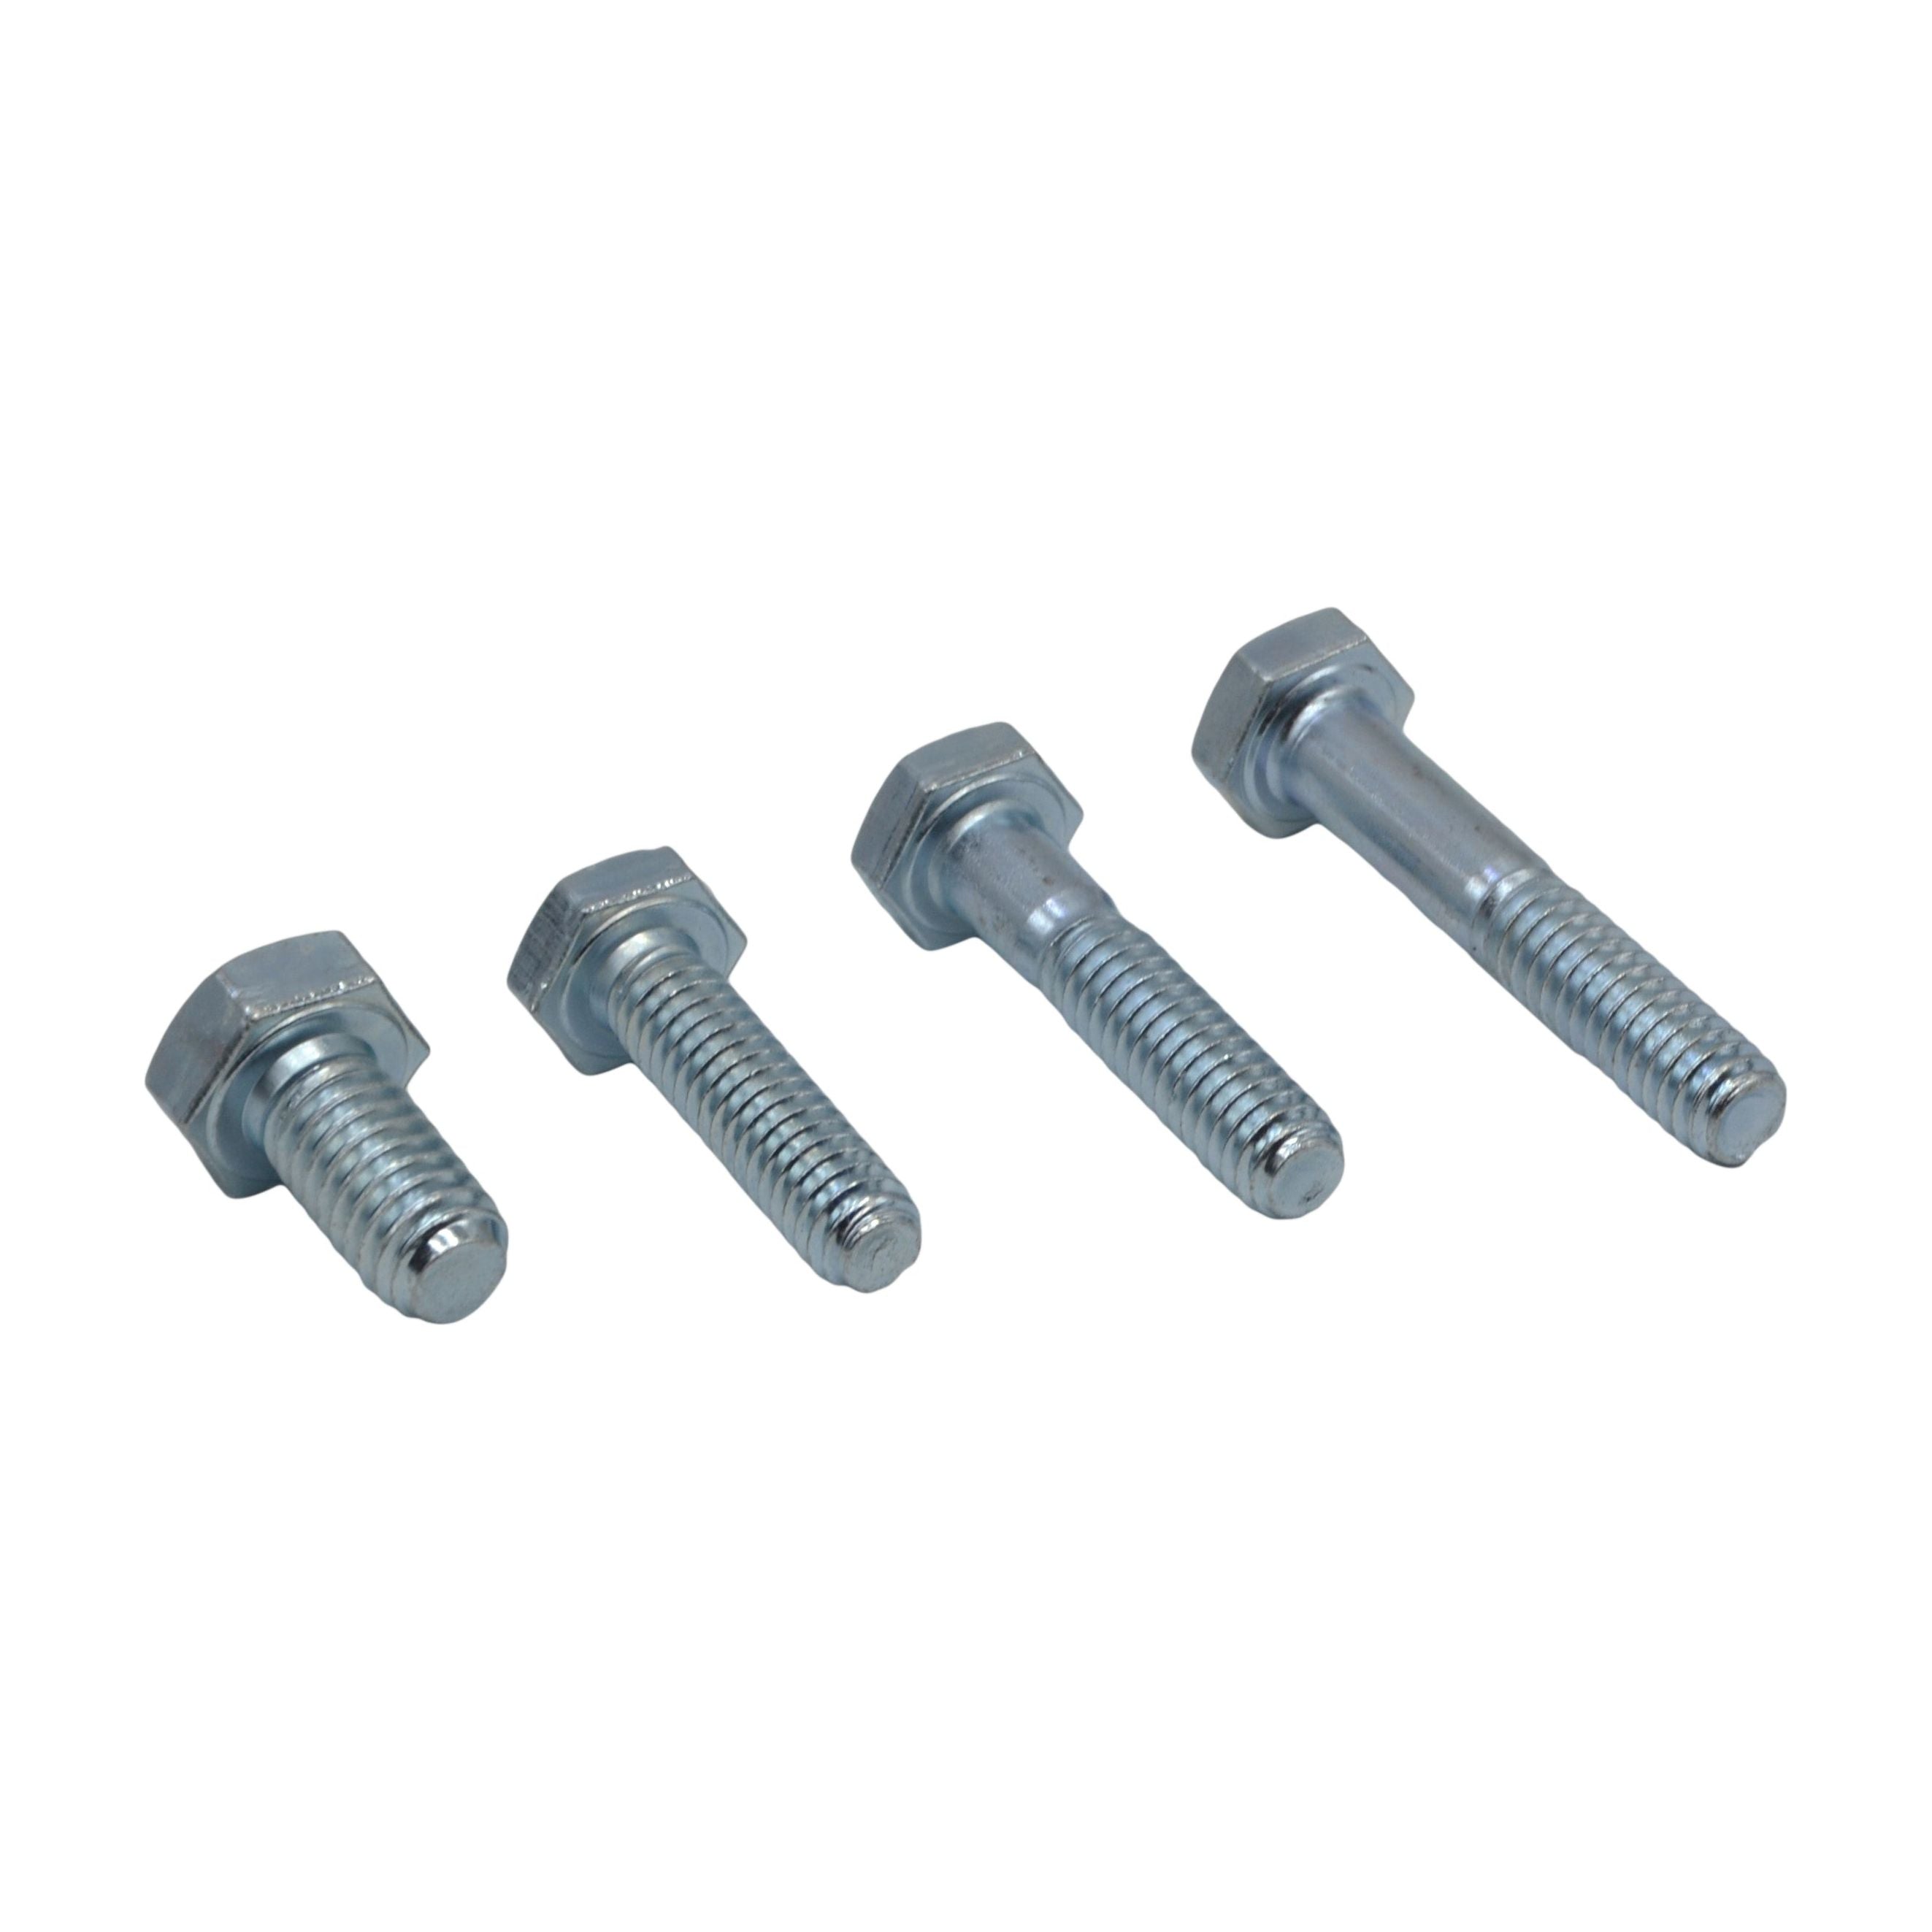 456 pc High Tensile Imperial Nut and Bolt Grab Kit